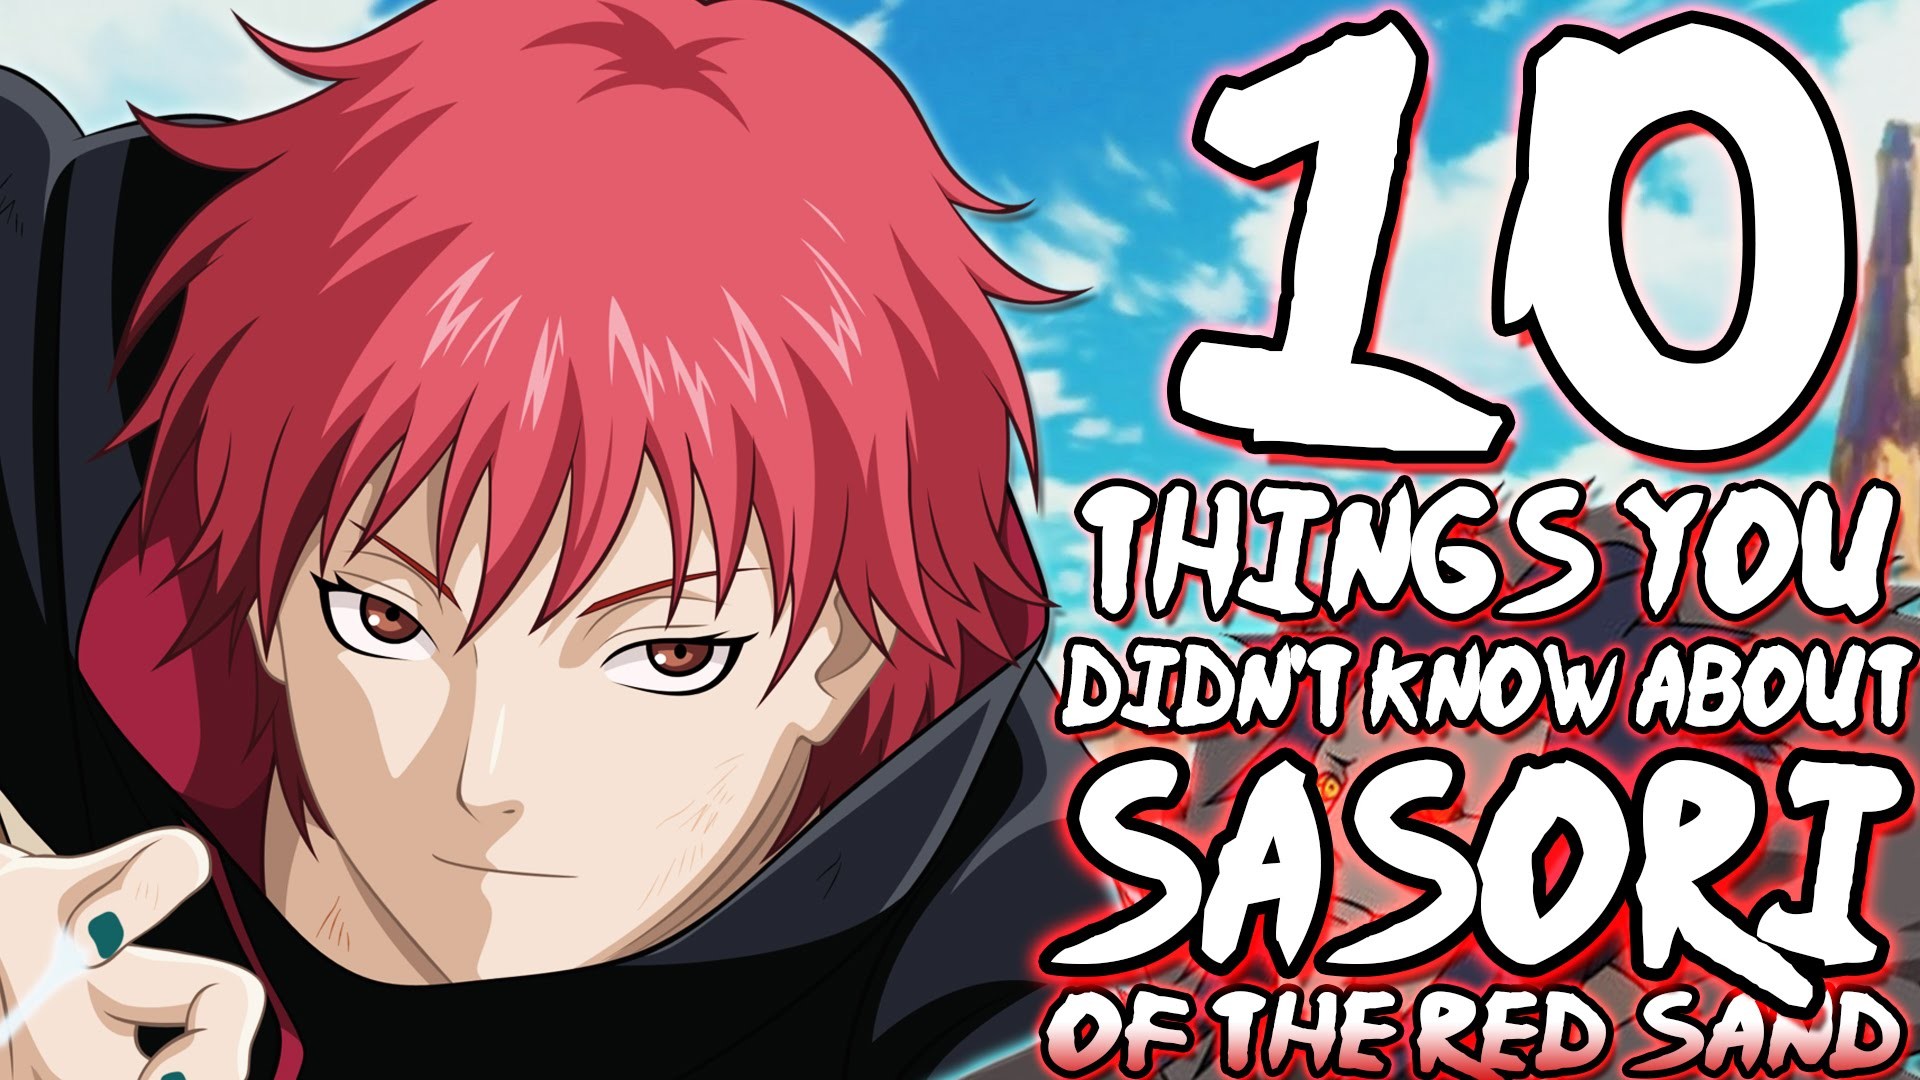 1920x1080 10 Things You Probably Didn't Know About Sasori Of The Red Sand! (10 Facts)  | Naruto Shippuden - YouTube